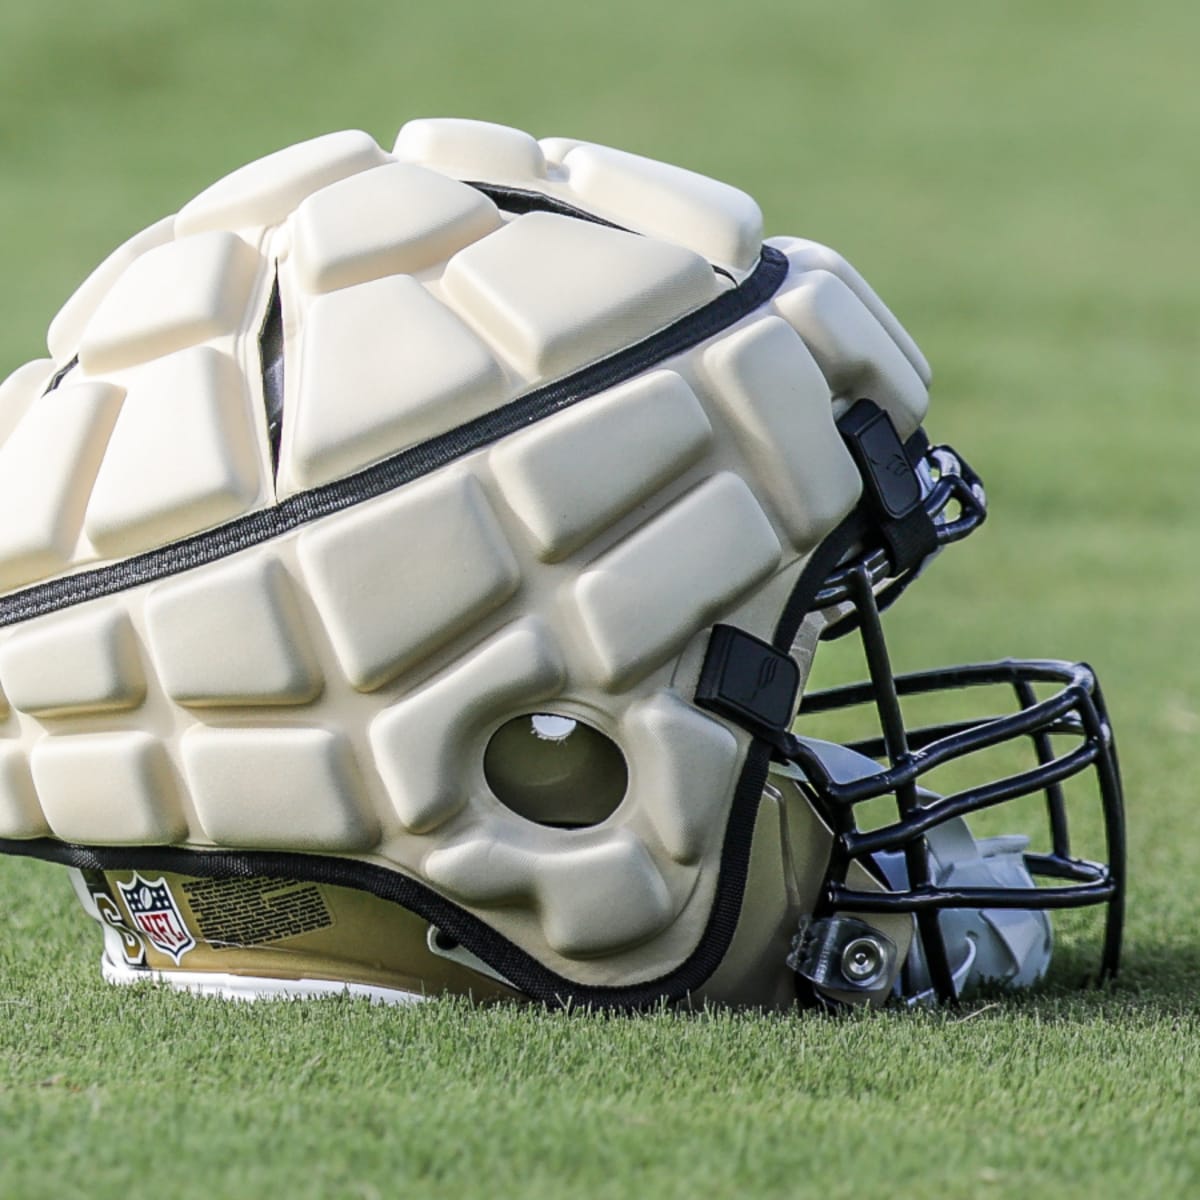 Large Bubble Helmets Are Guardian Caps, NFL's New Safety Measure